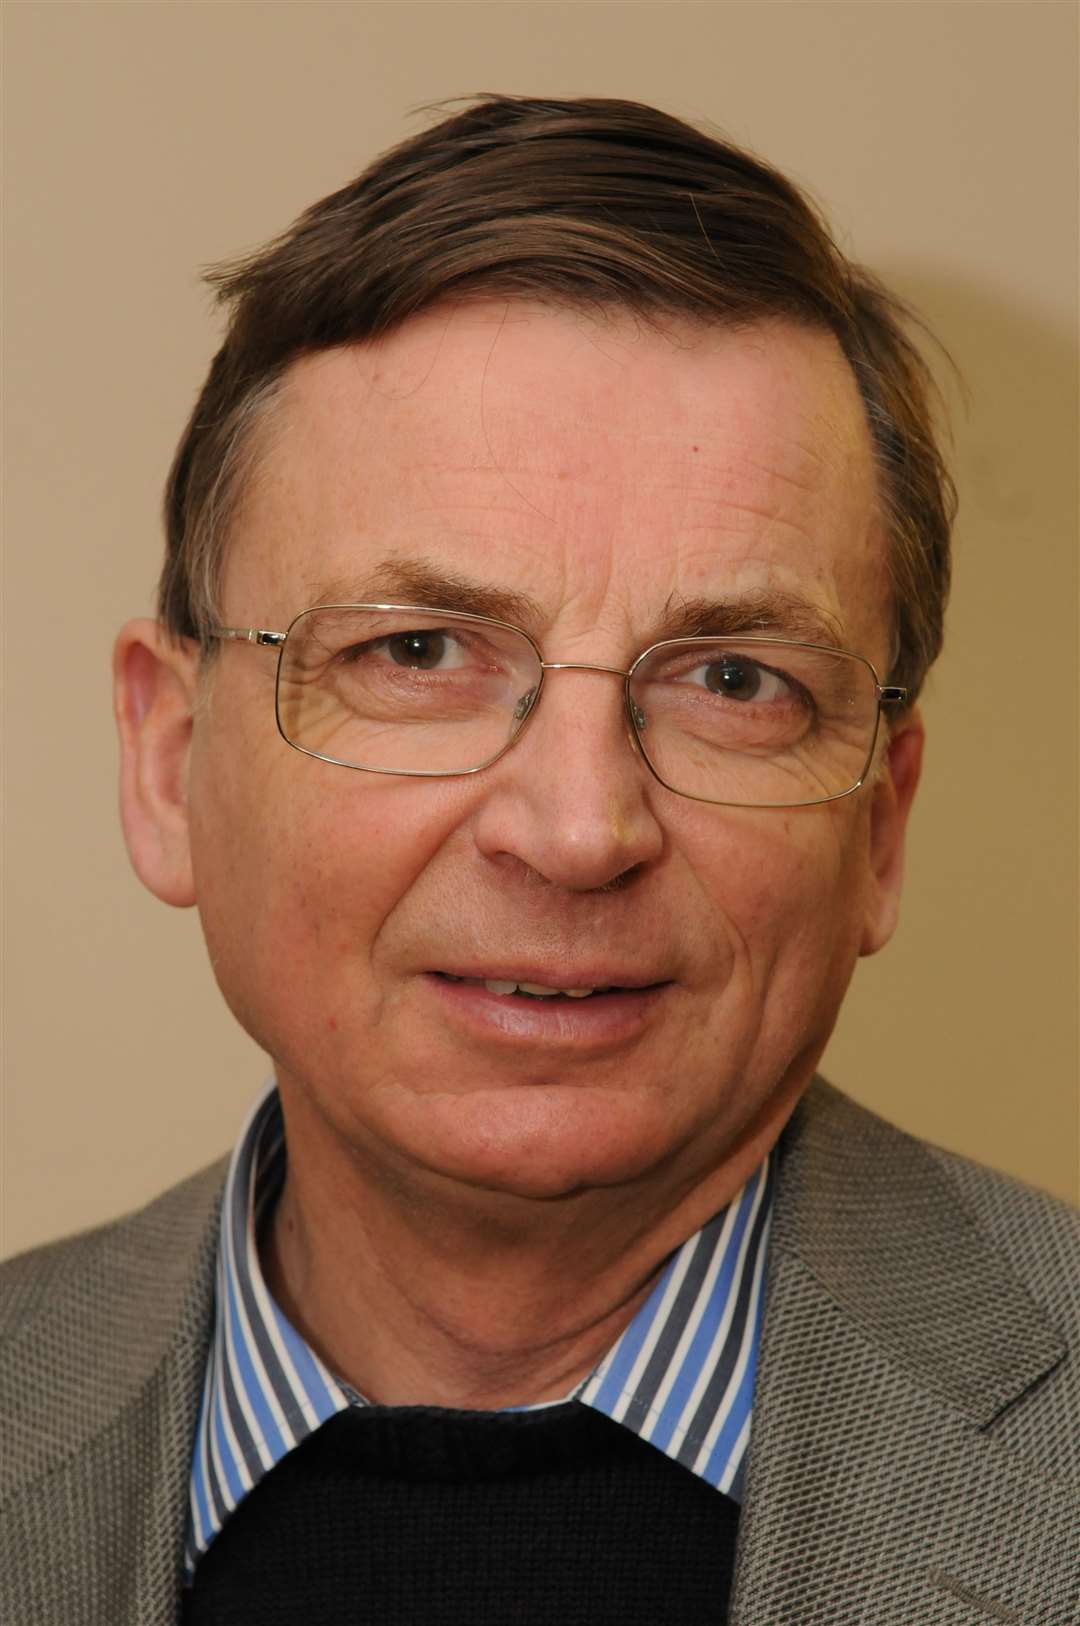 Cllr Graham Gibbens, KCC cabinet member for adult social care and public health